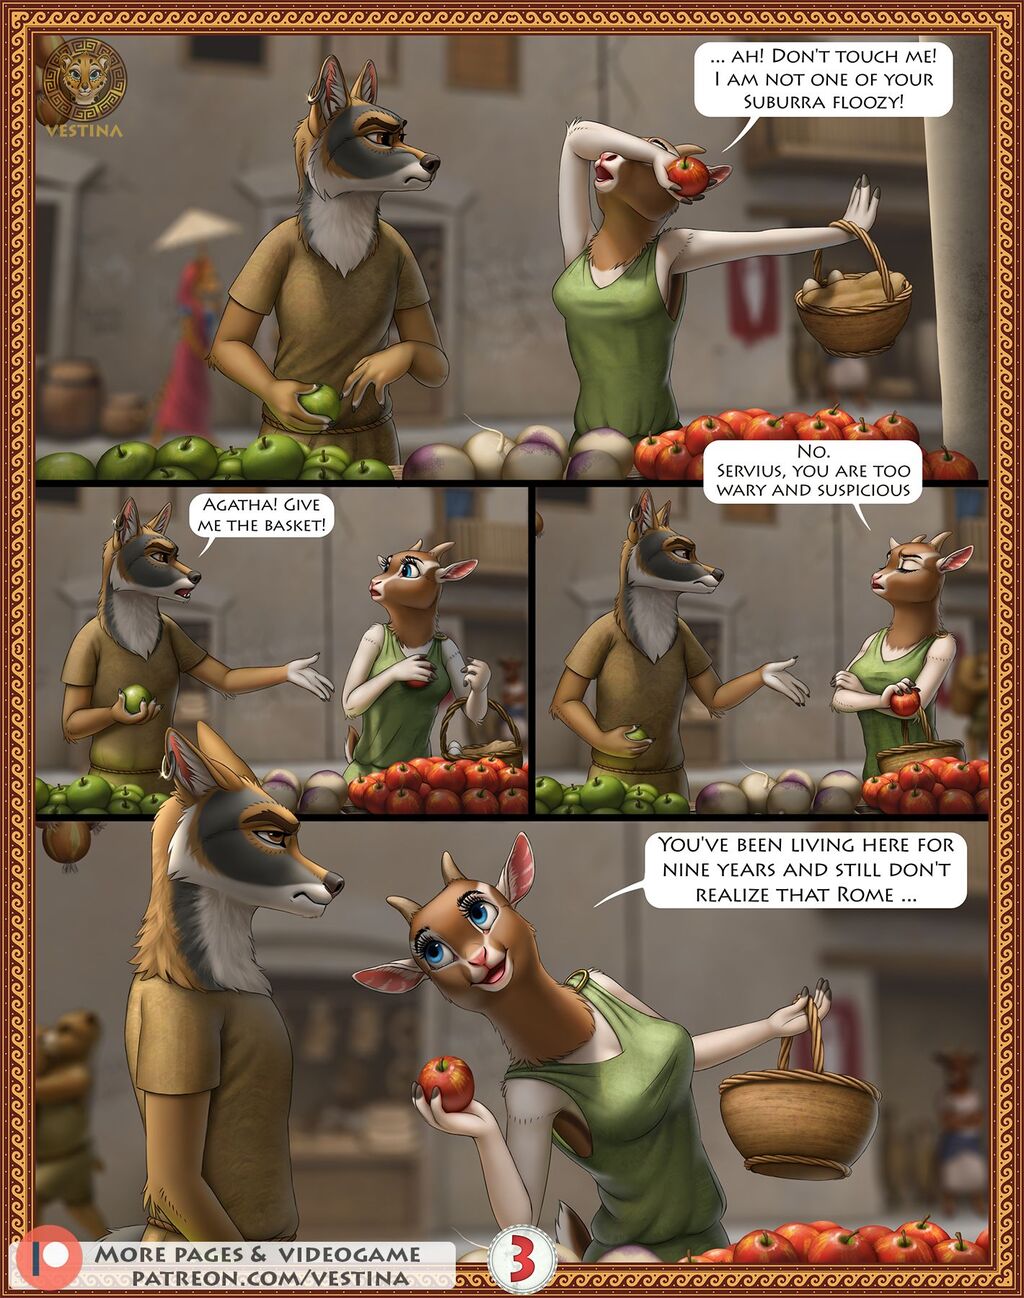 Furry Rome page 3